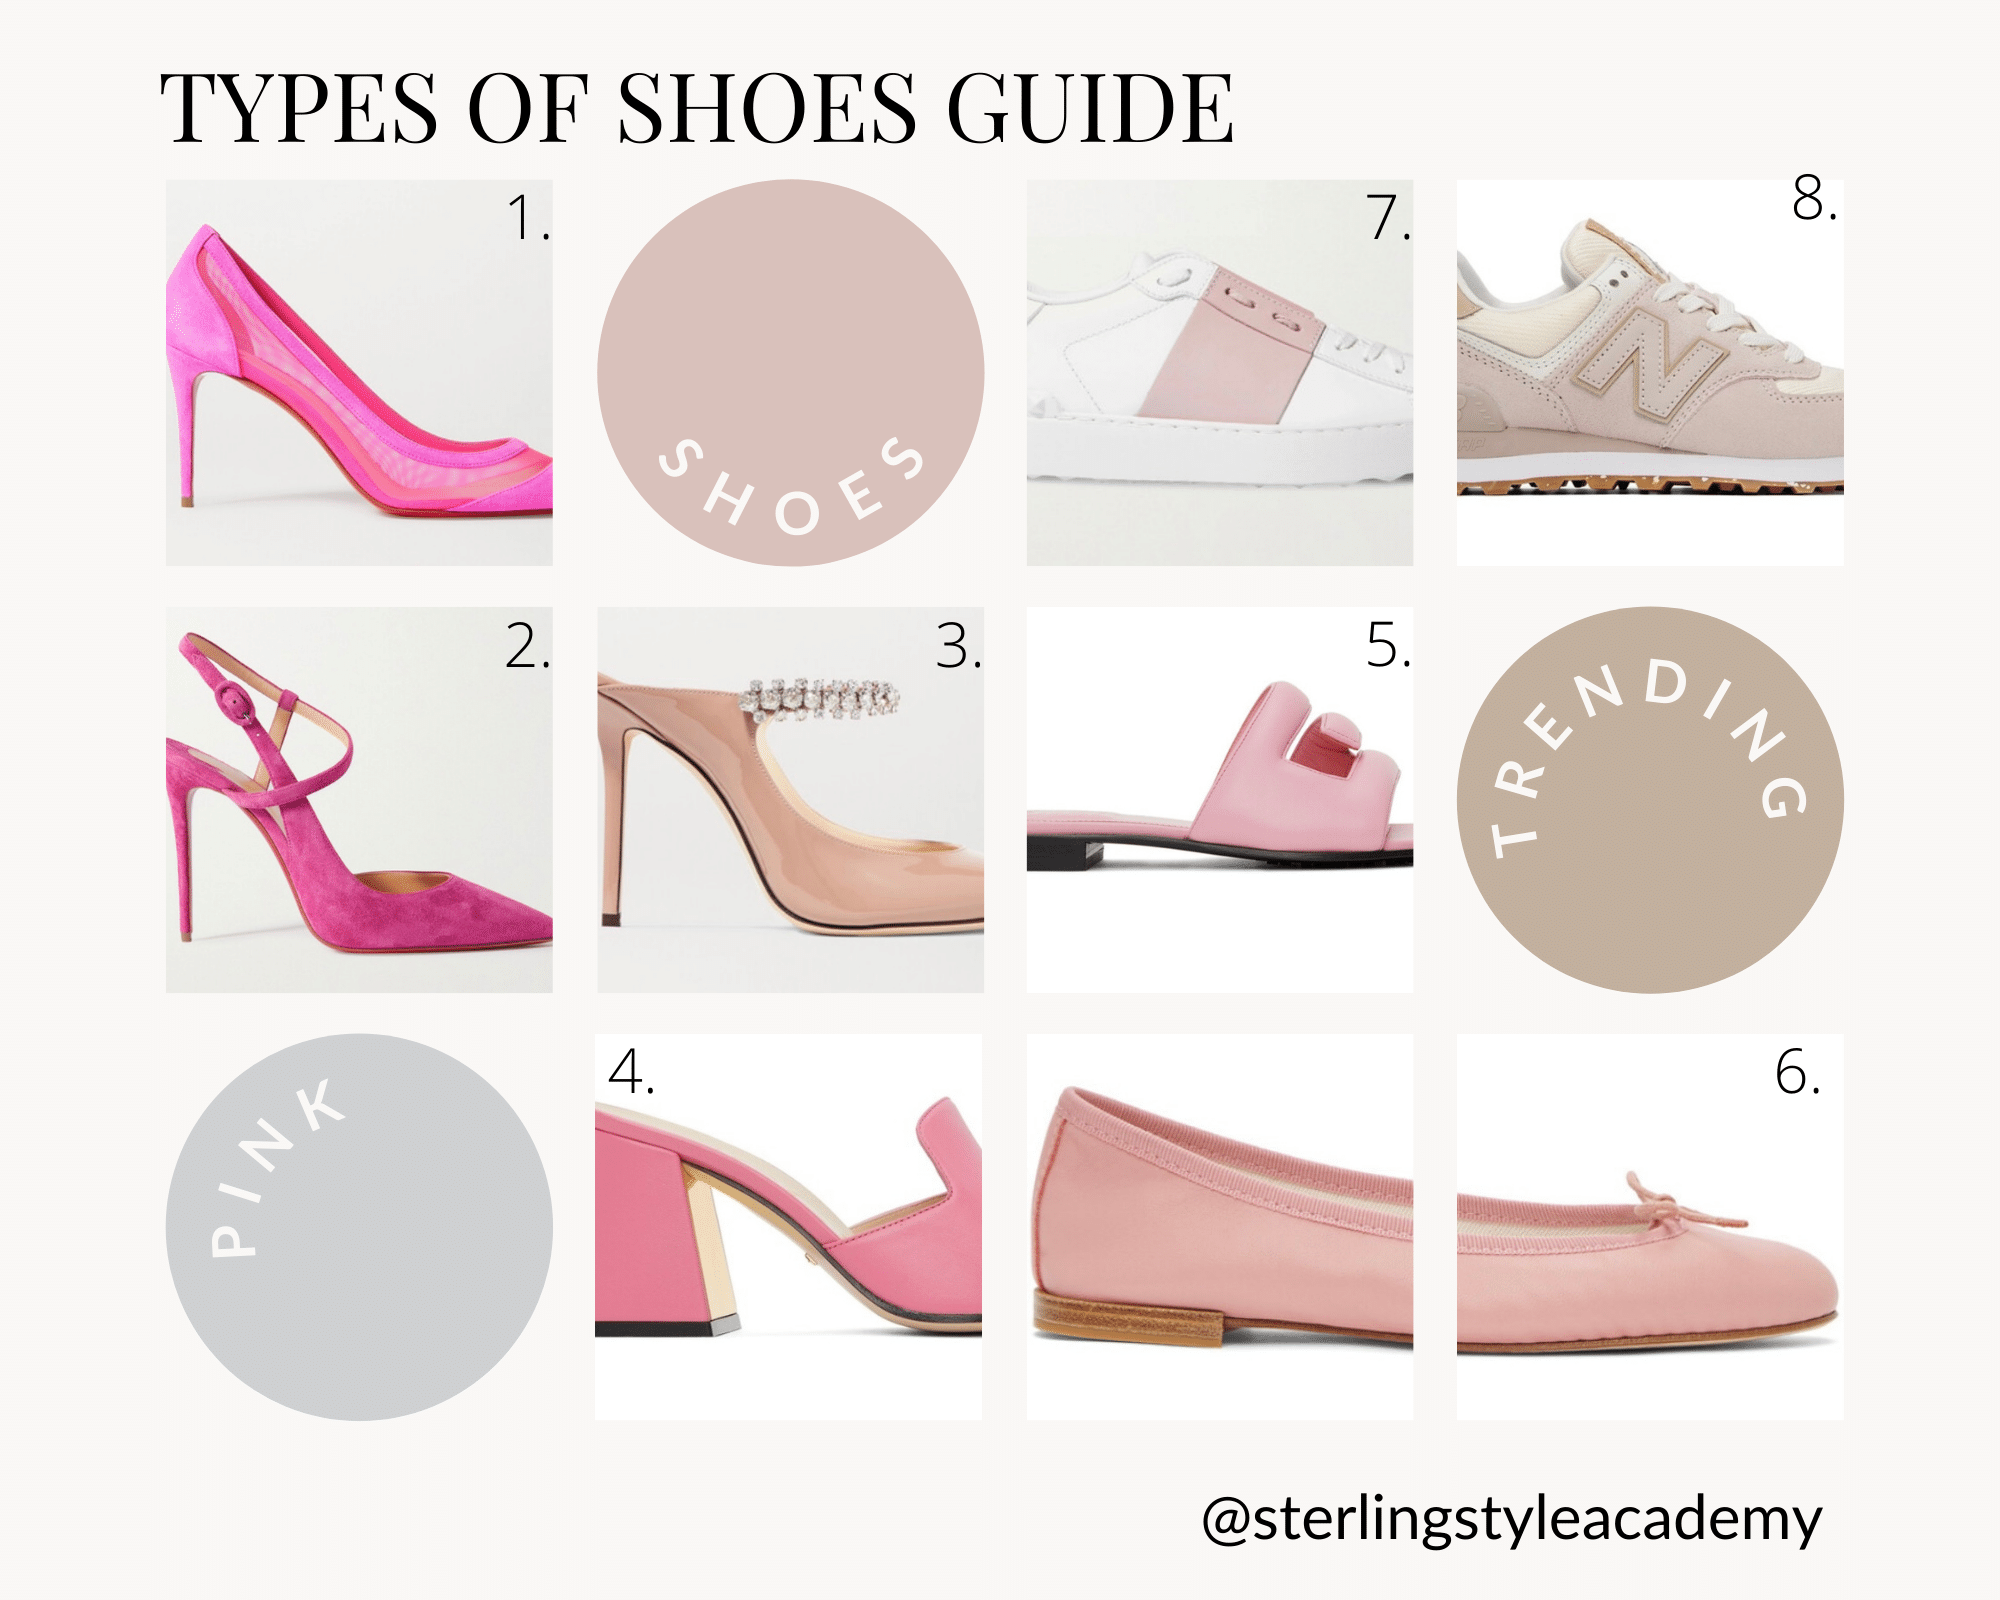 8 Foundational Types of Shoes Guide for Ladies - Image Consultant Training  & Personal Stylist Courses | Sterling Style Academy | New York | Dubai |  Paris | Singapore 8 Foundational Types of Shoes Guide for Ladies